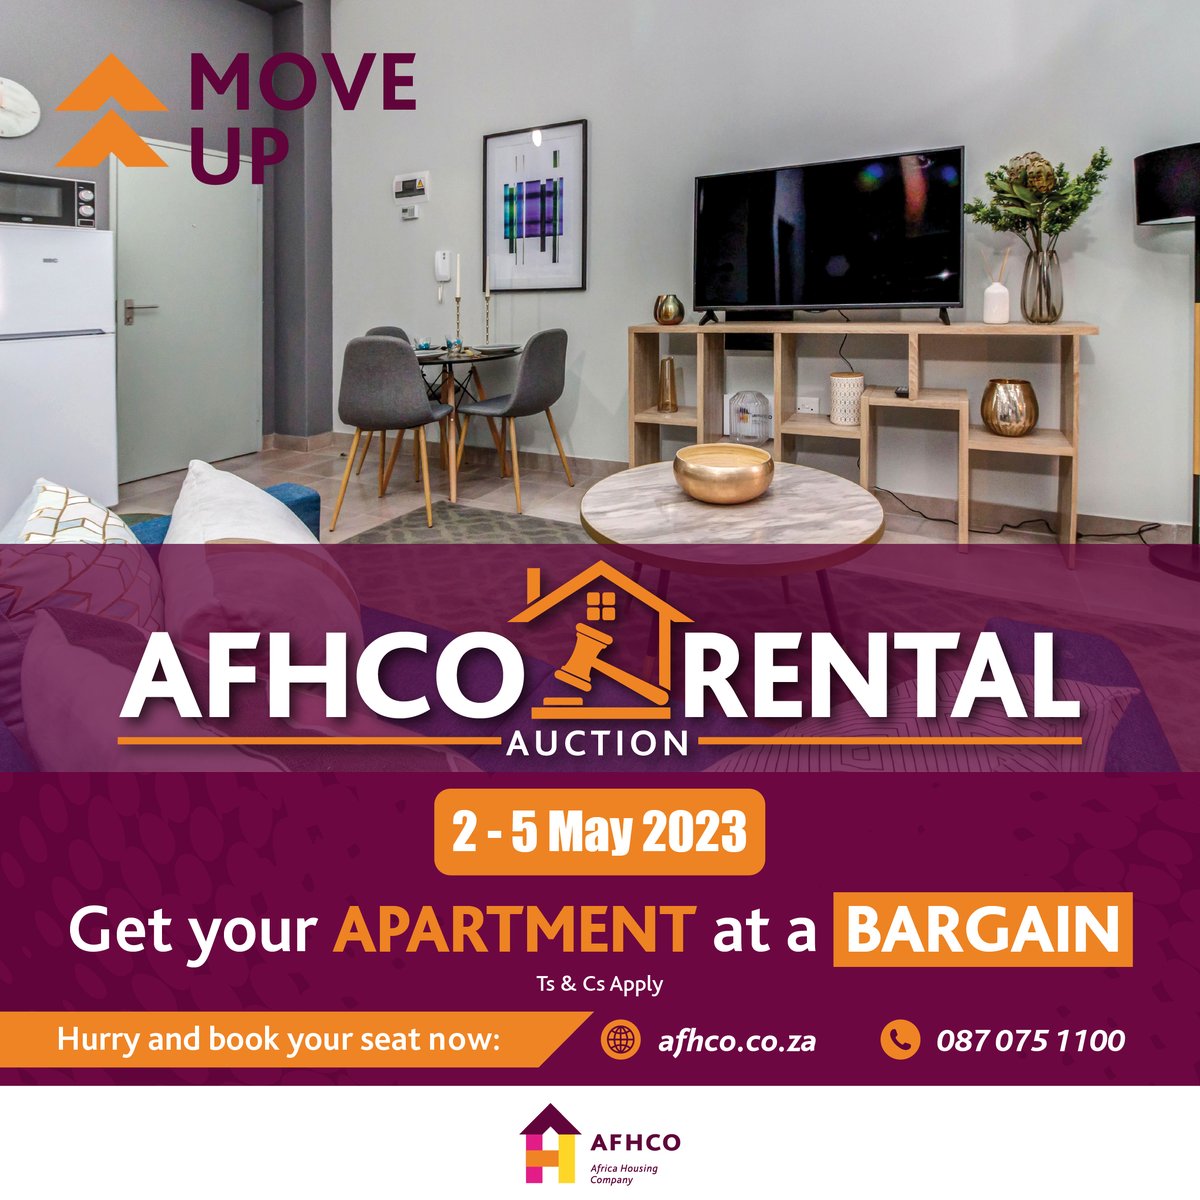 The Rental Auction has begun! People are bidding for their dream homes at affordable prices. #Rental #AFHCORentalAuction #innercityrentals #cityliving #MoveUp #StaywithAFHCO #apartmentstolet #MoveUpwithAFHCO #AFHCO #propertymanagement #rent #apartments #johannesburg #gauteng